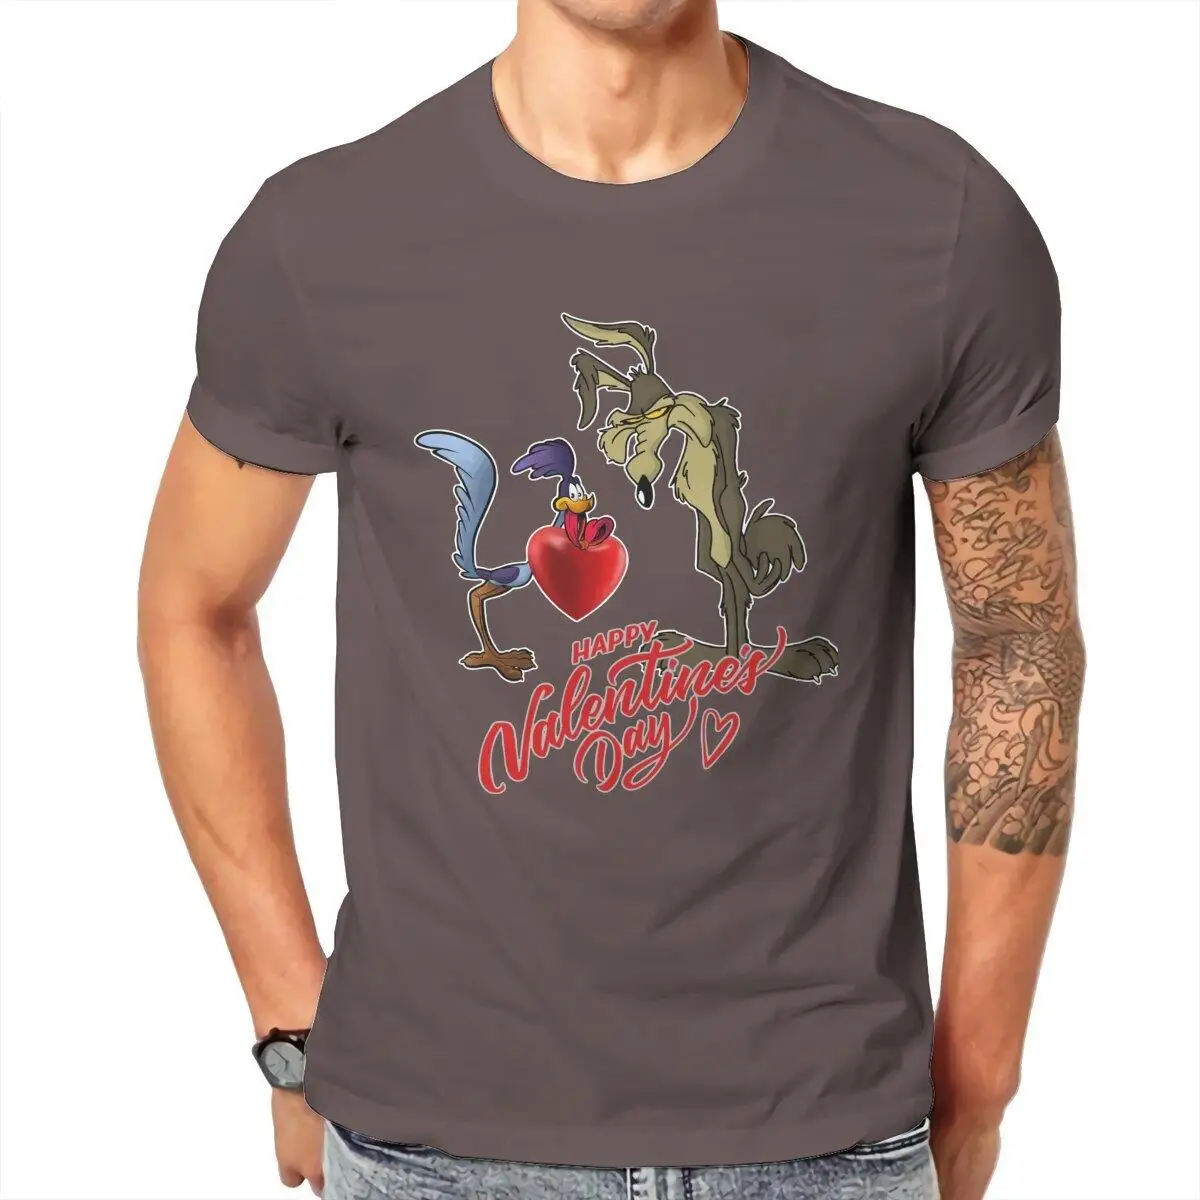 Fashion Roadrunner And El Coyote T-Shirts for Men Crew Neck 100% Cotton T Shirt  Short Sleeve Tee Shirt Gift Idea Clothes